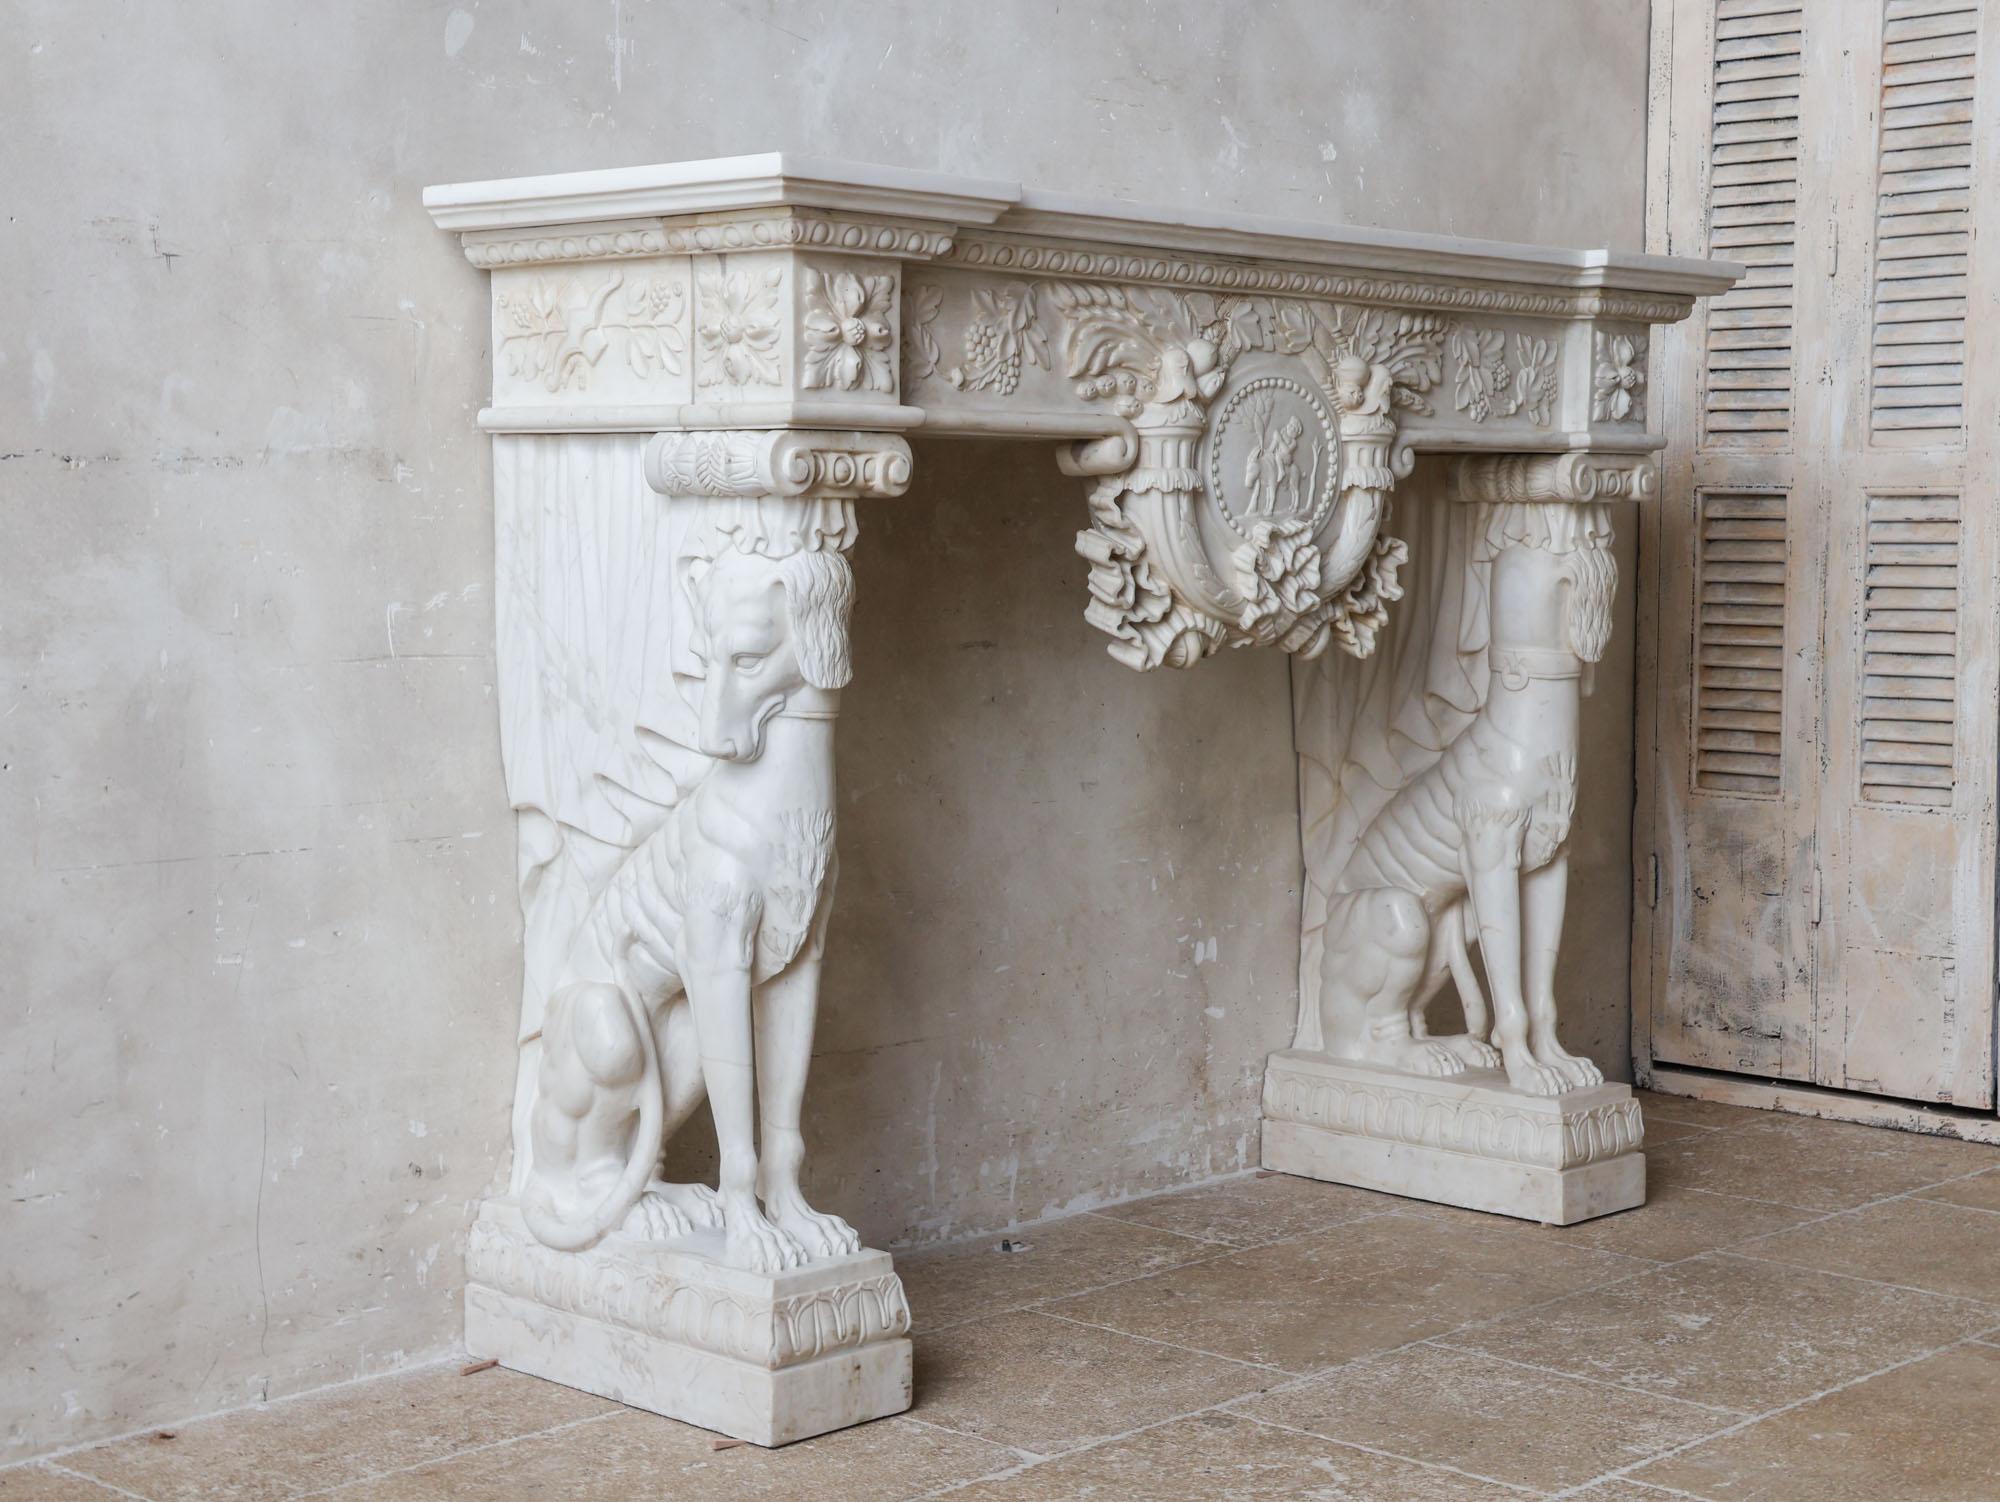 A Rich and Ornate Monumental Mantelpiece Italian Renaissance Revival Style For Sale 3